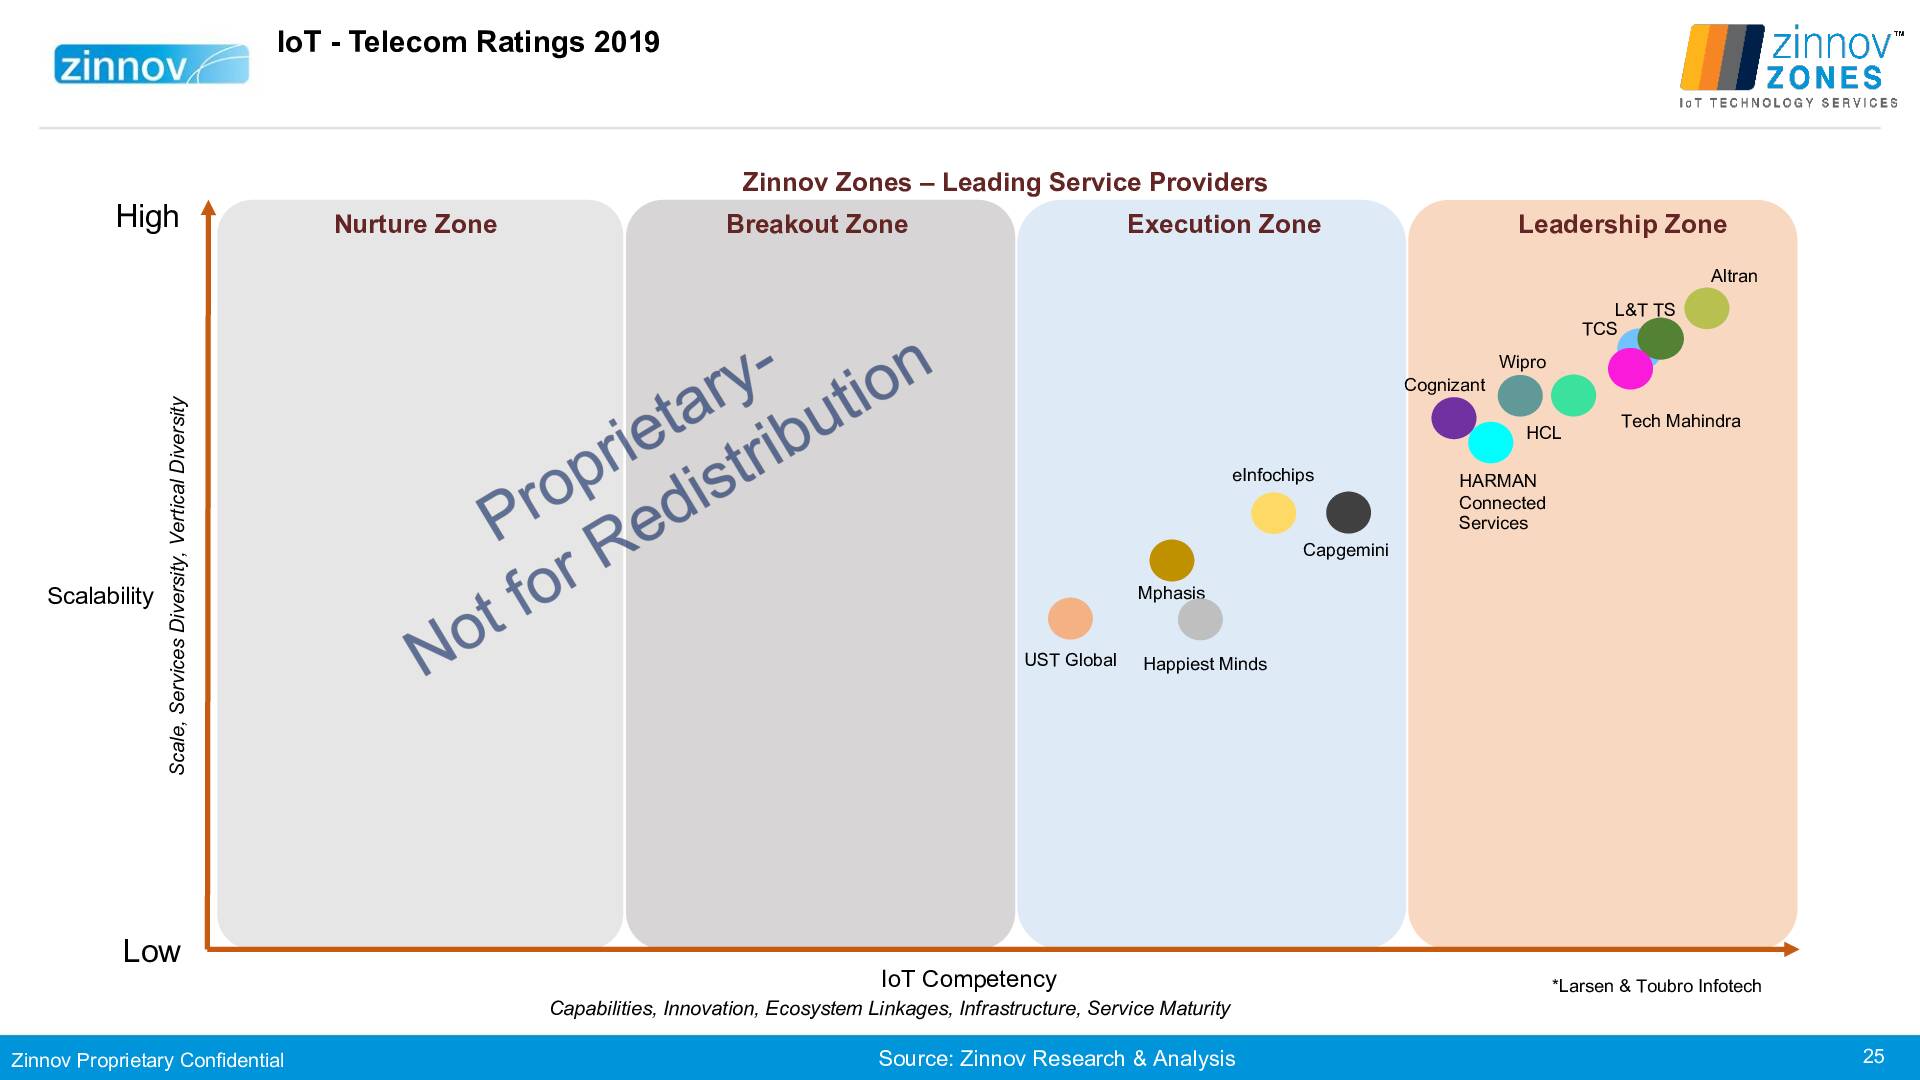 Zinnov Zones Iot Technology Services 2019 Ratings25